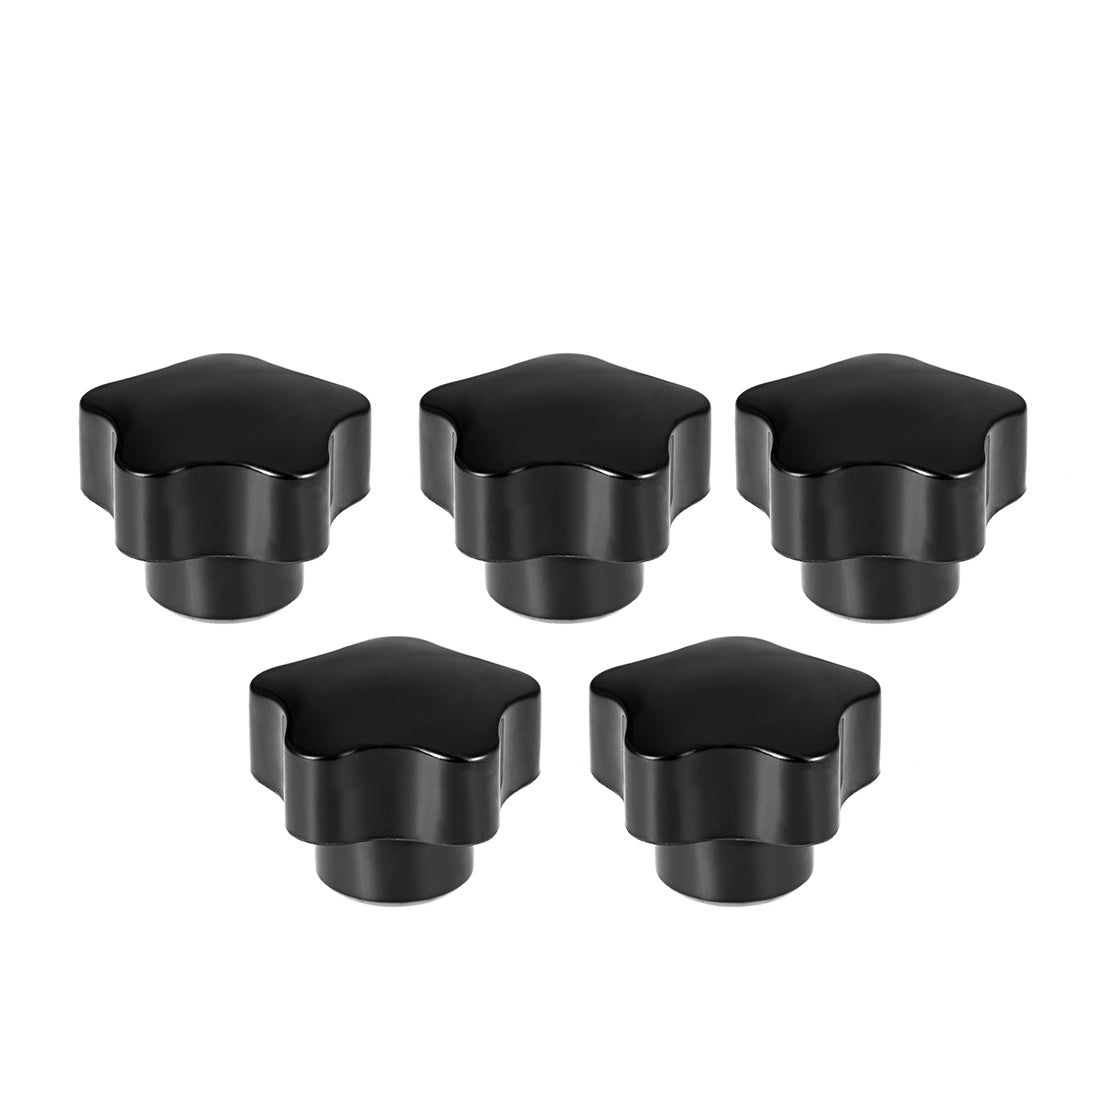 uxcell Uxcell Star Knobs Grip Handle Brass Insert Female Thread Set of 5 Black